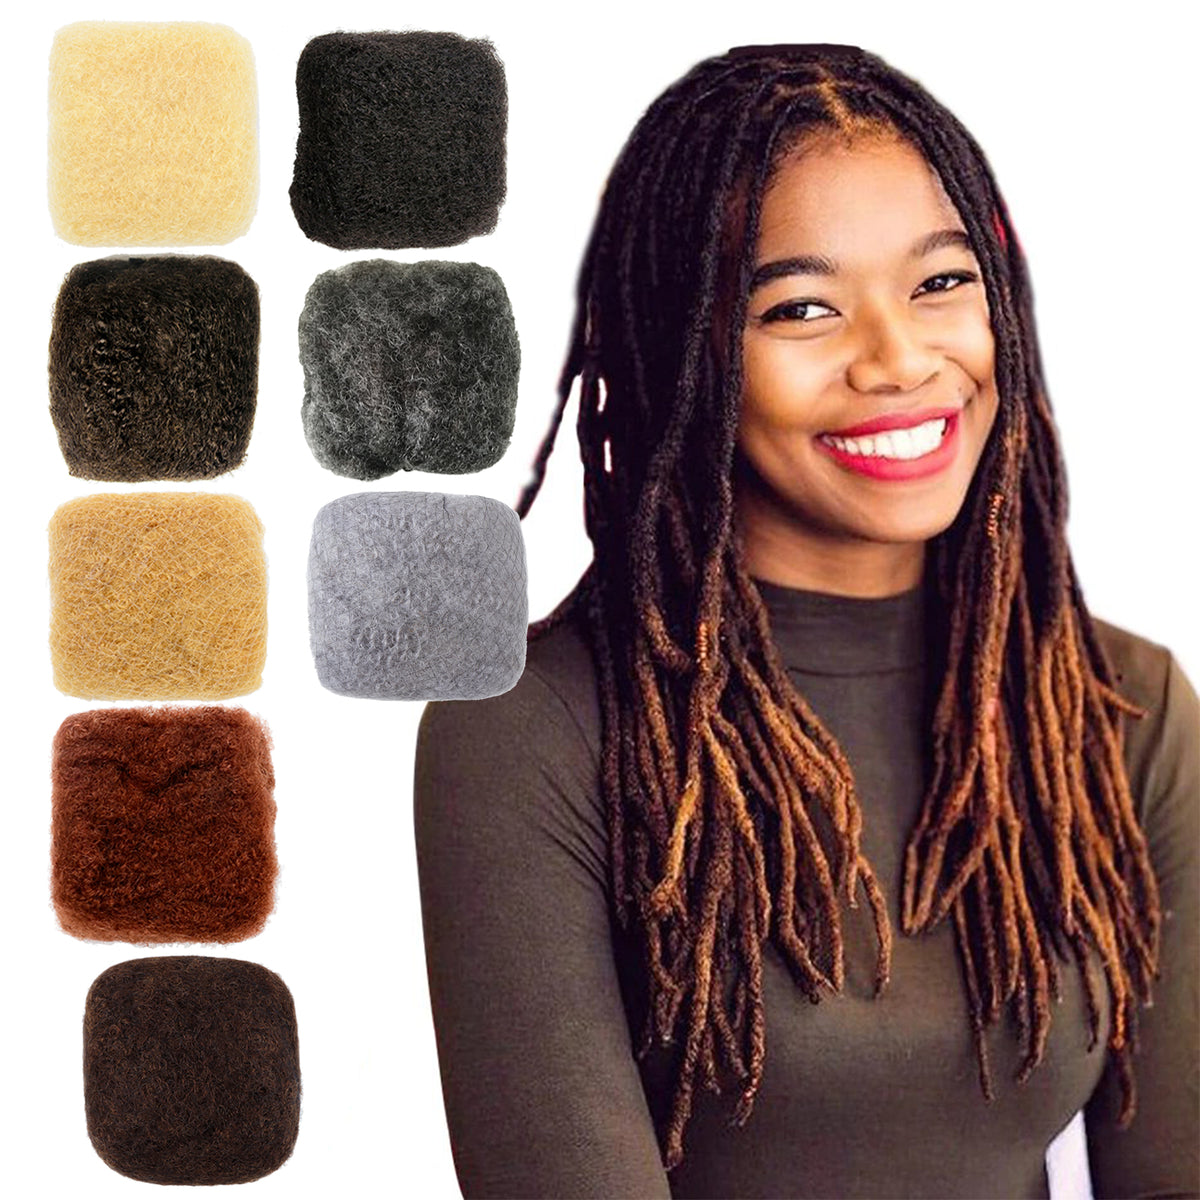 Afro Kinky Human Hairs For Making,Repairing & Bulking Locs 8 Inch Long Afro Kinky Bulk Human Hair For Dreadlock Extensions 100% Natural Afro Hairs For Twisting & Braiding 29g/1Oz (Grey, 8 Inch)